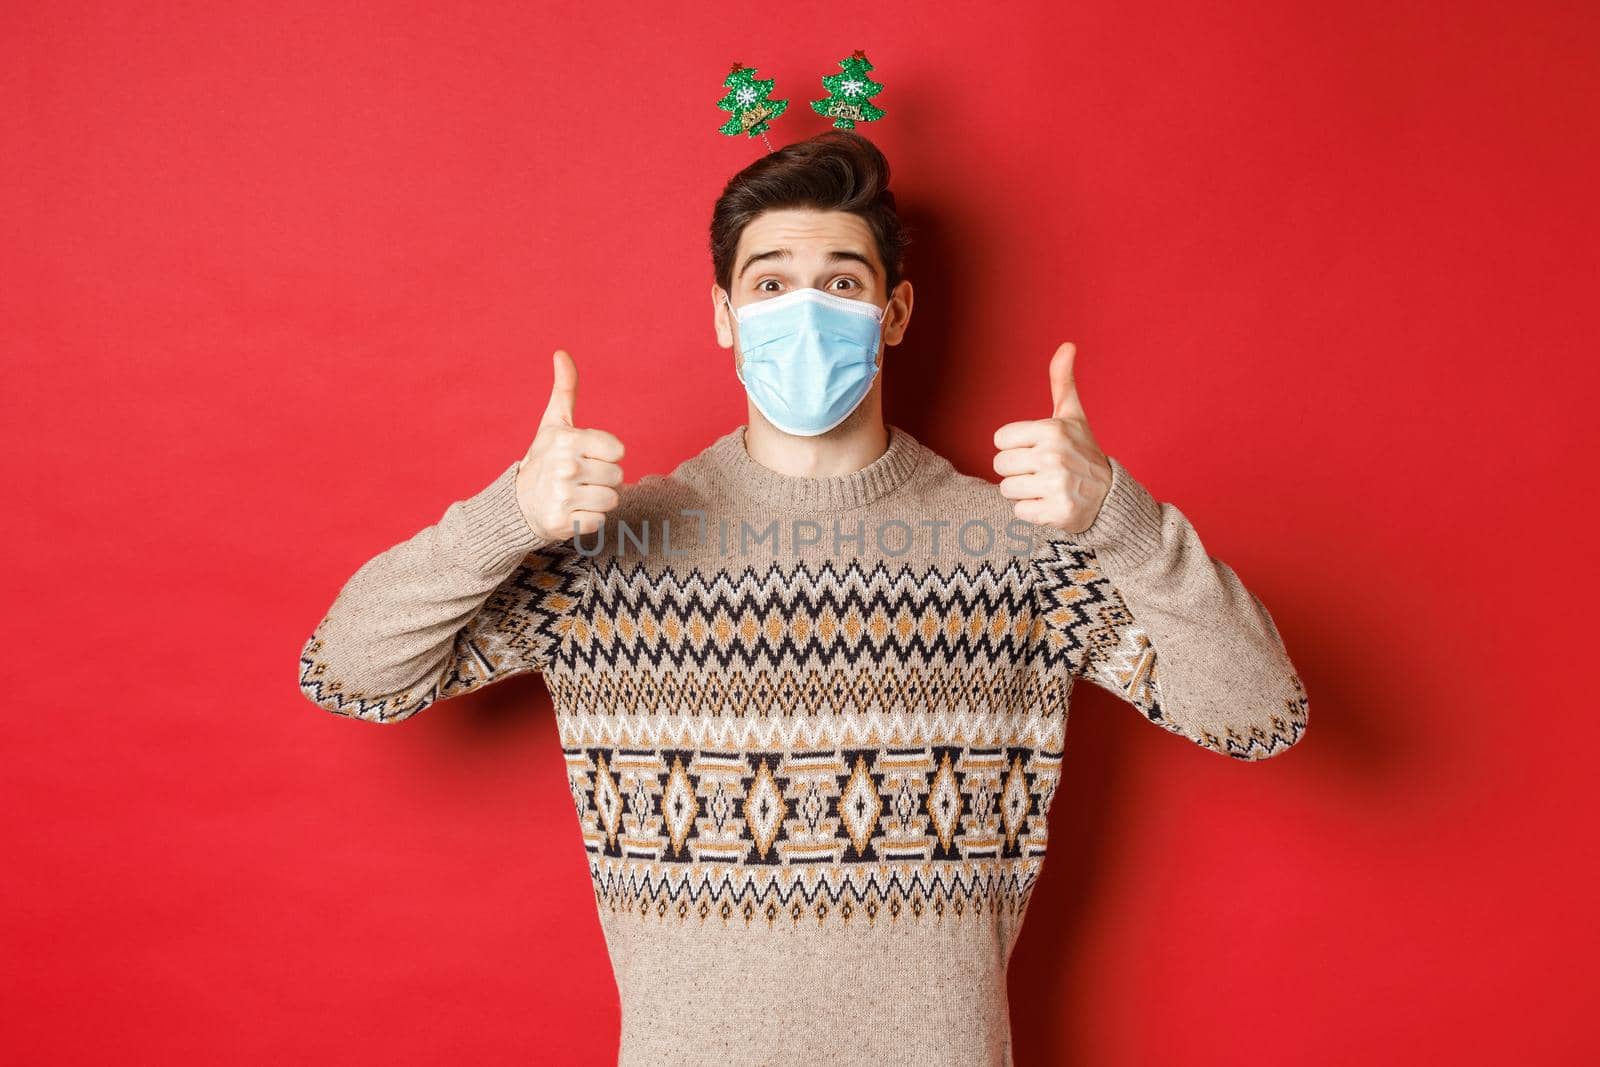 Concept of new year, covid-19 and social distancing. Cheerful caucasian man in sweater and medical mask, celebrating christmas during pandemic, showing thumbs-up, red background.